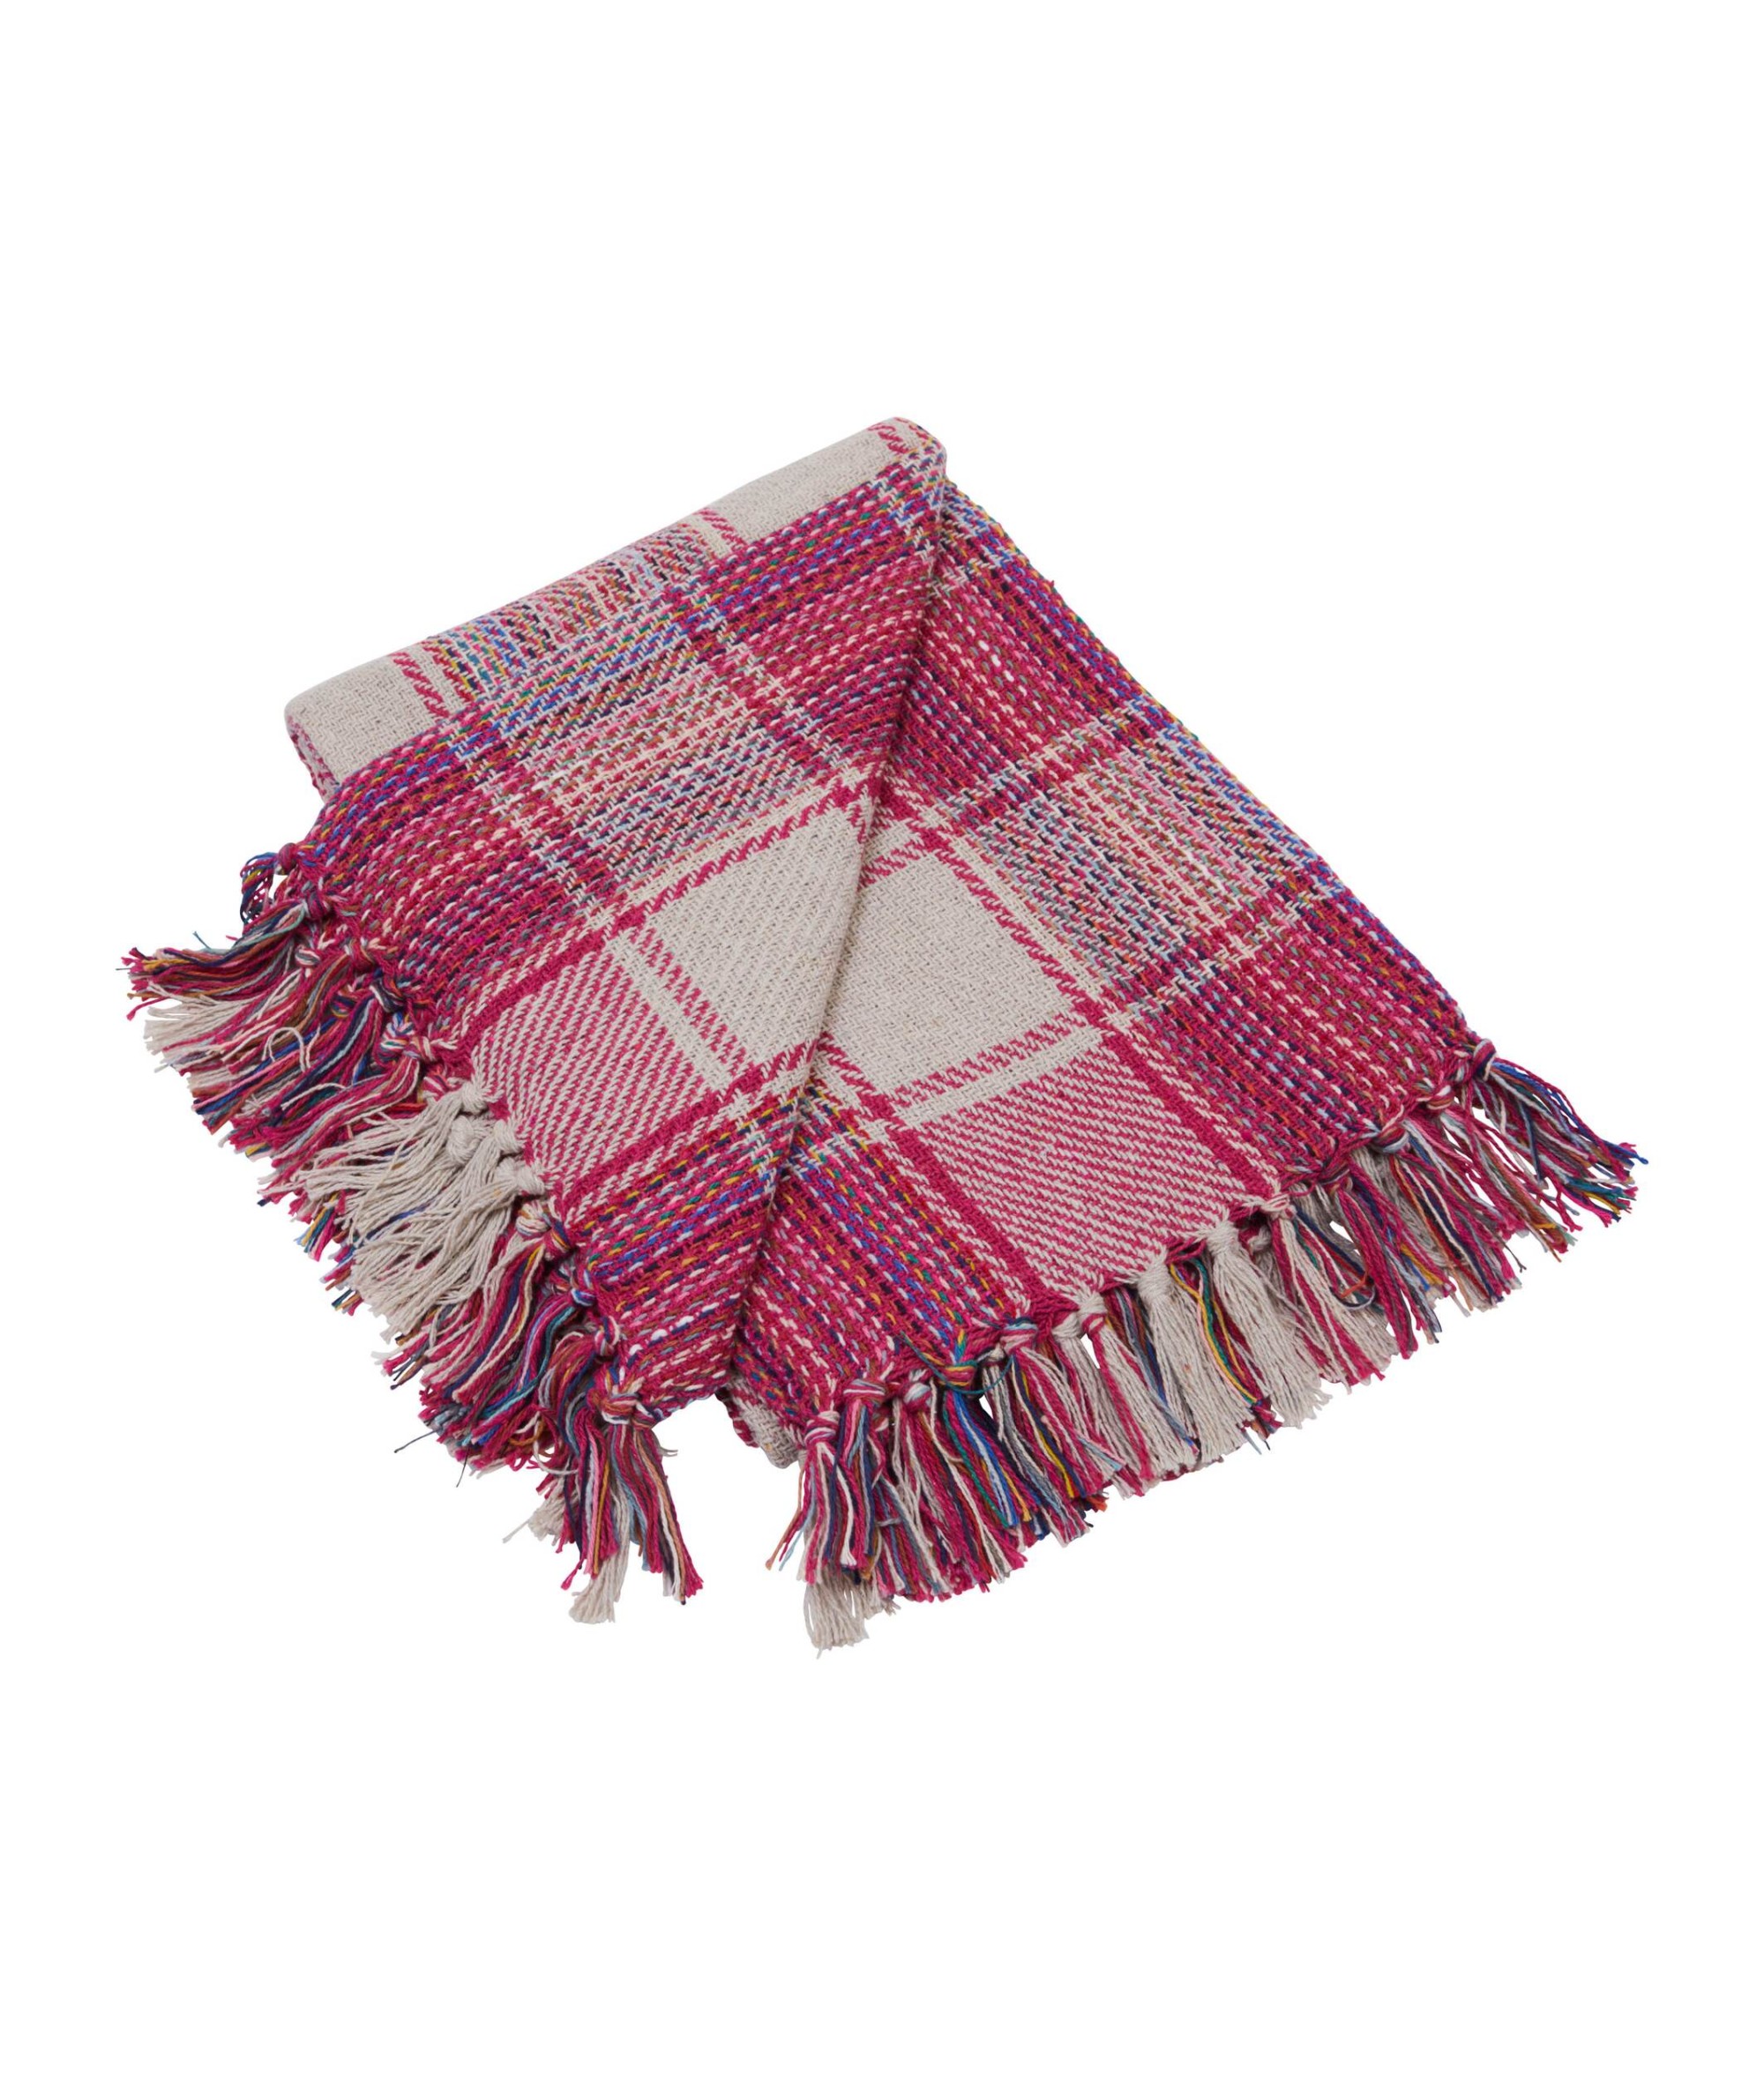 Race for Life Recycled Picnic Blanket | Cancer Research UK Online Shop